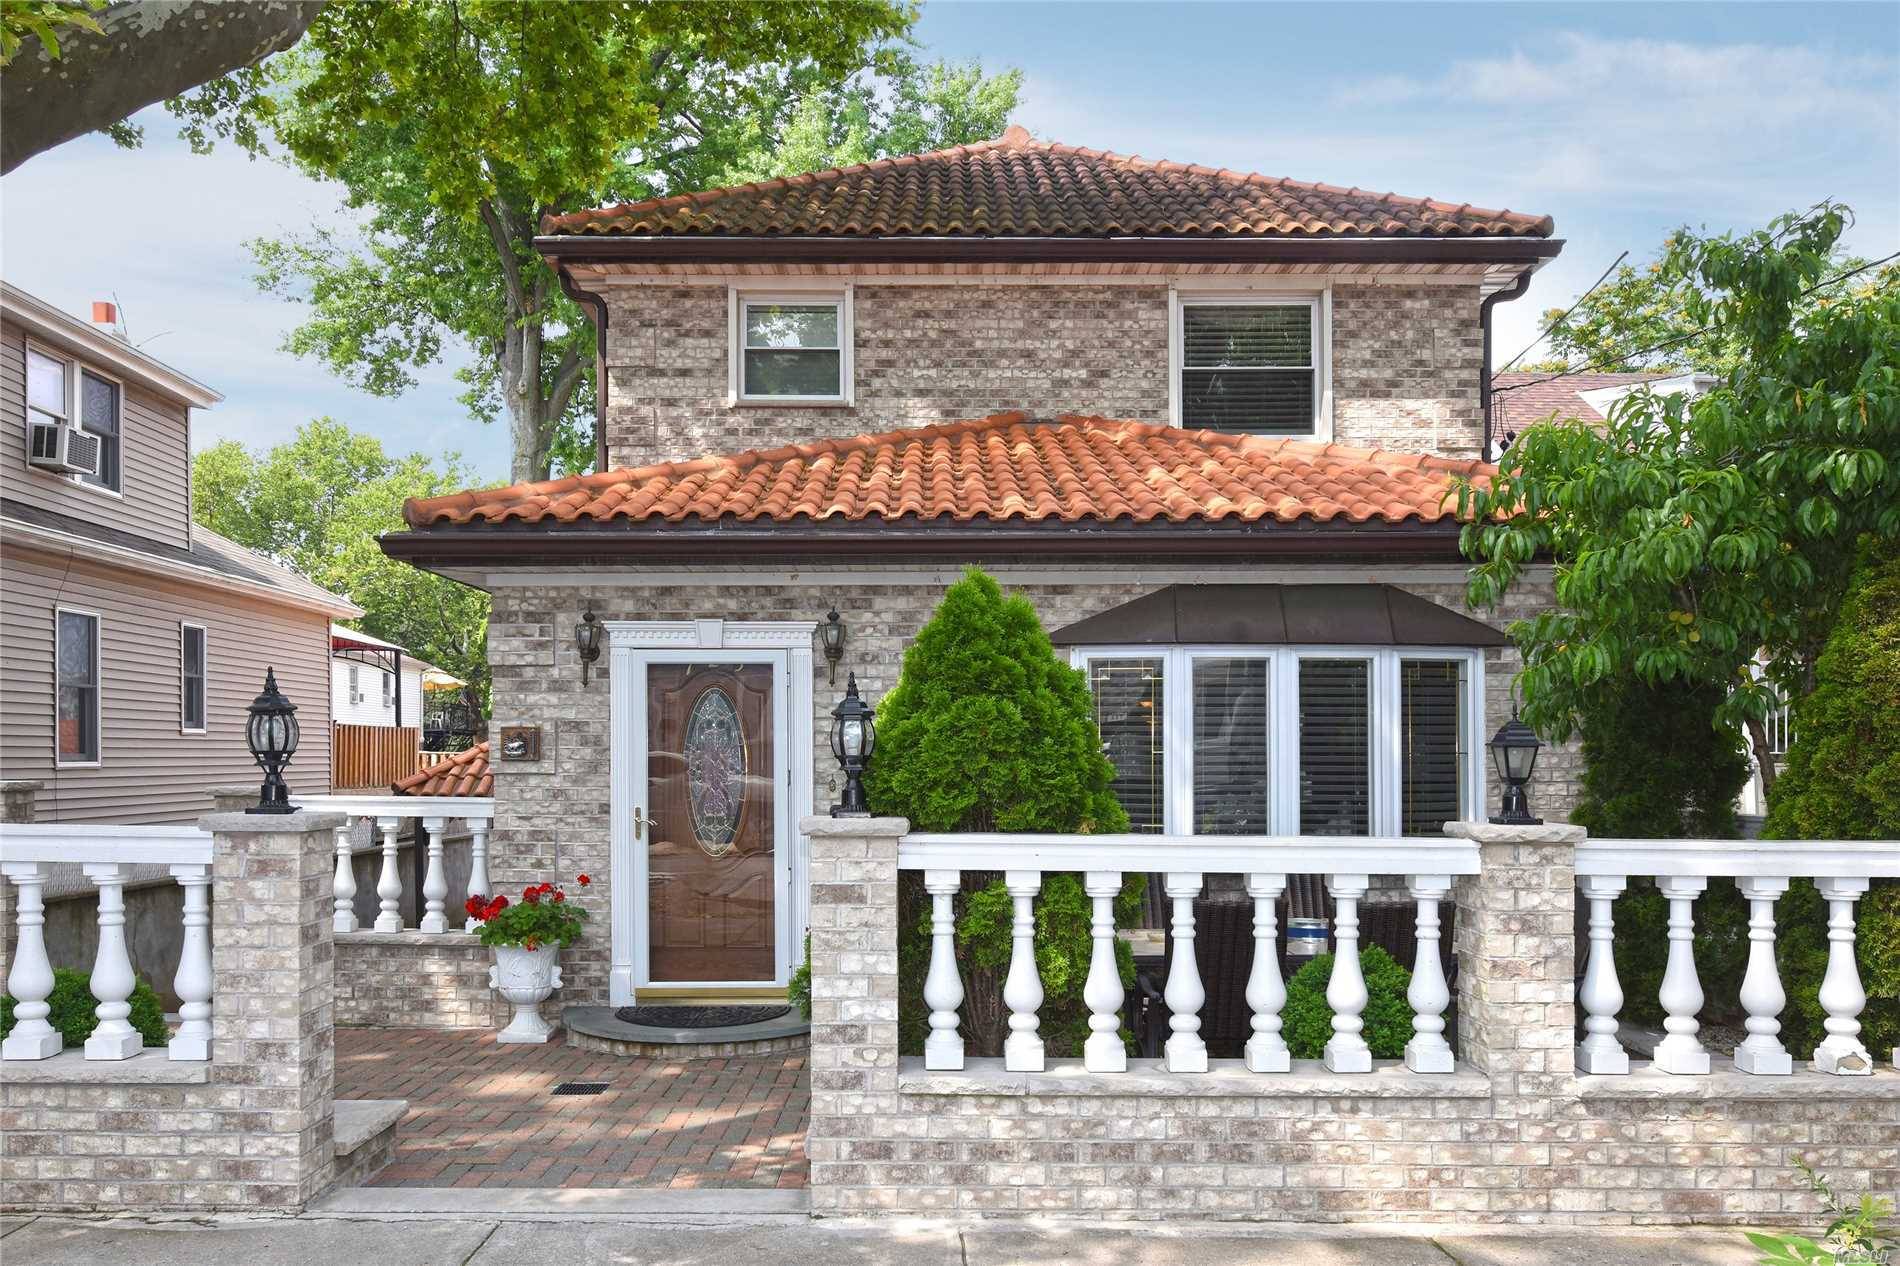 Step Into This Custom Renovated 3 Bedroom , 4 Bath Home In Coveted Throgs Neck/Country Club Section Of The Bronx.